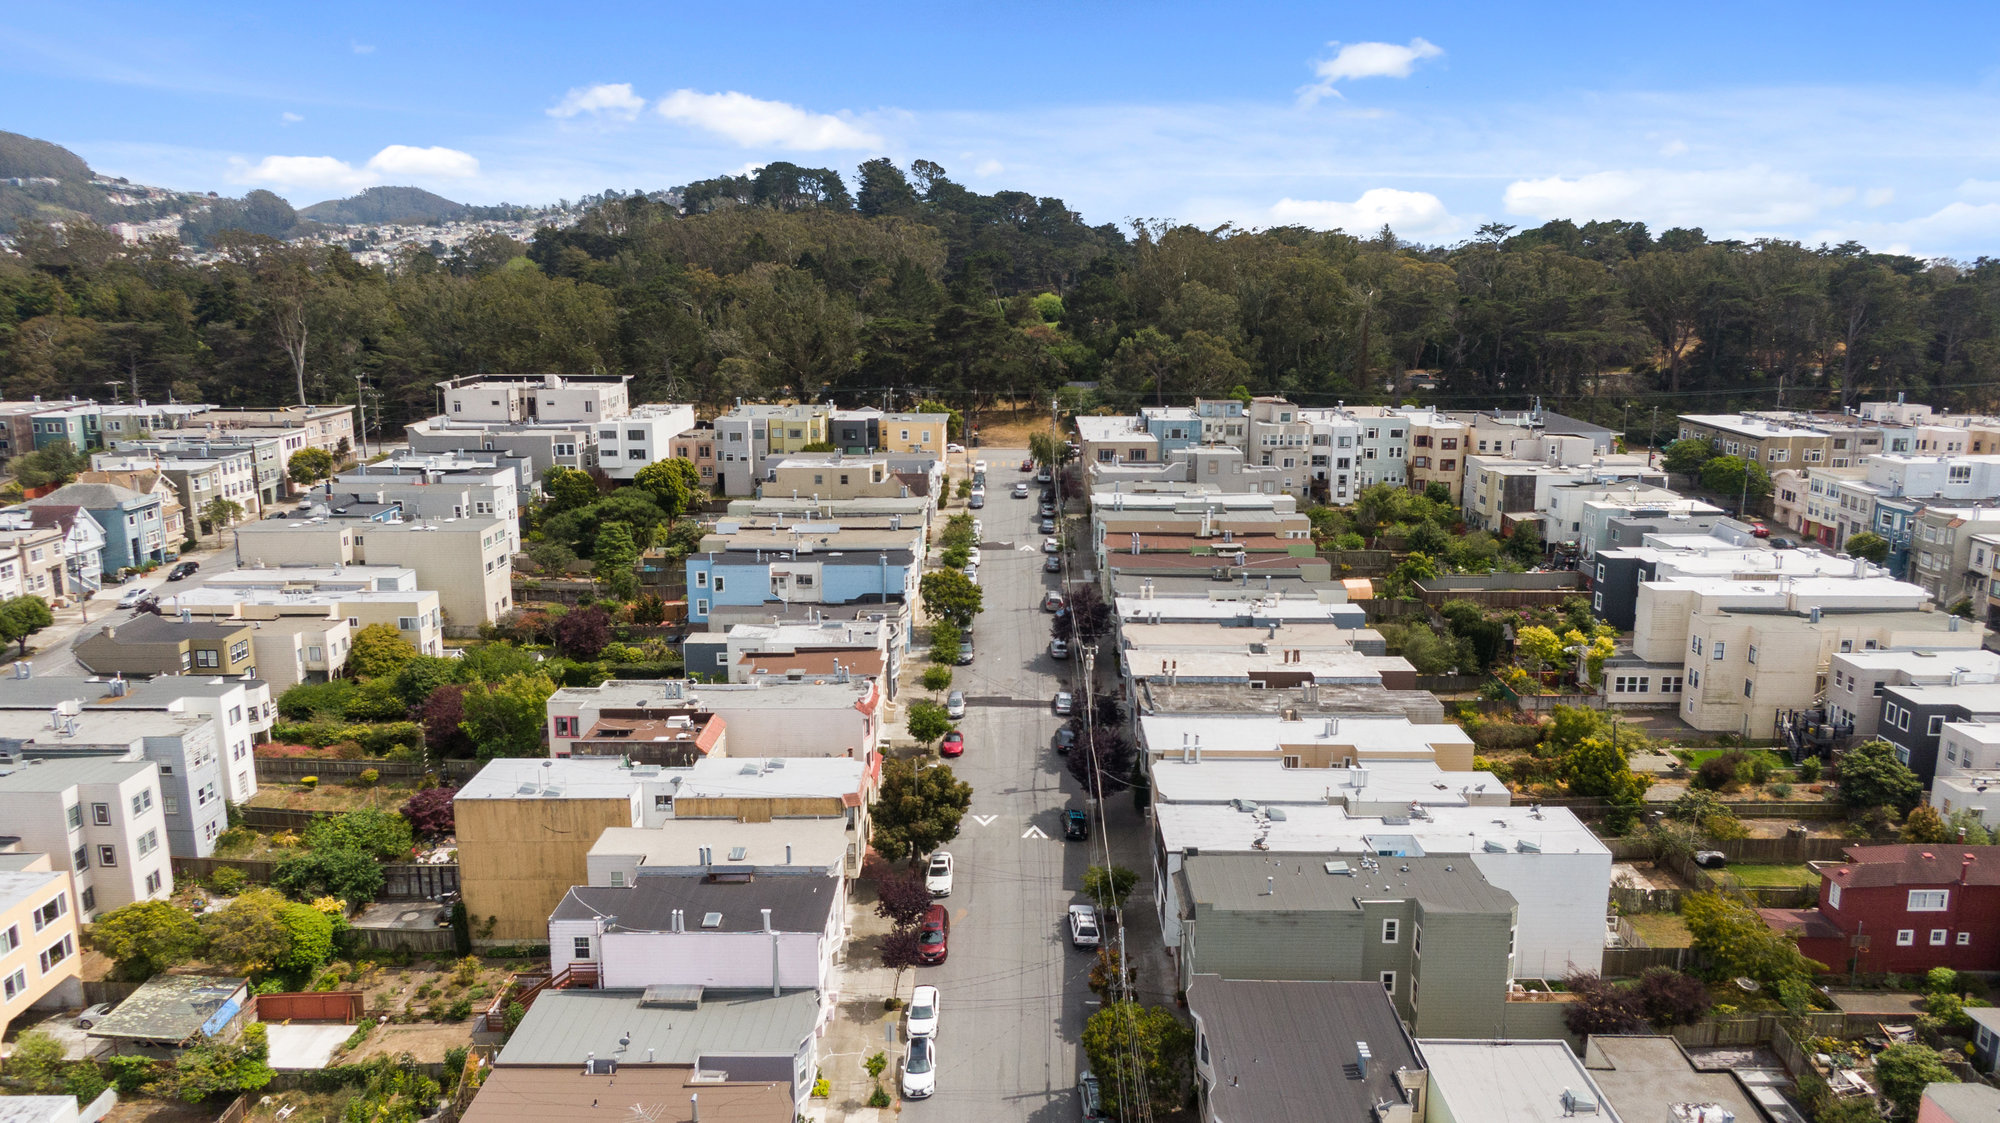 Property Photo: Aerial street view as seen from 719 18th Avenue, showing the neighboring homes